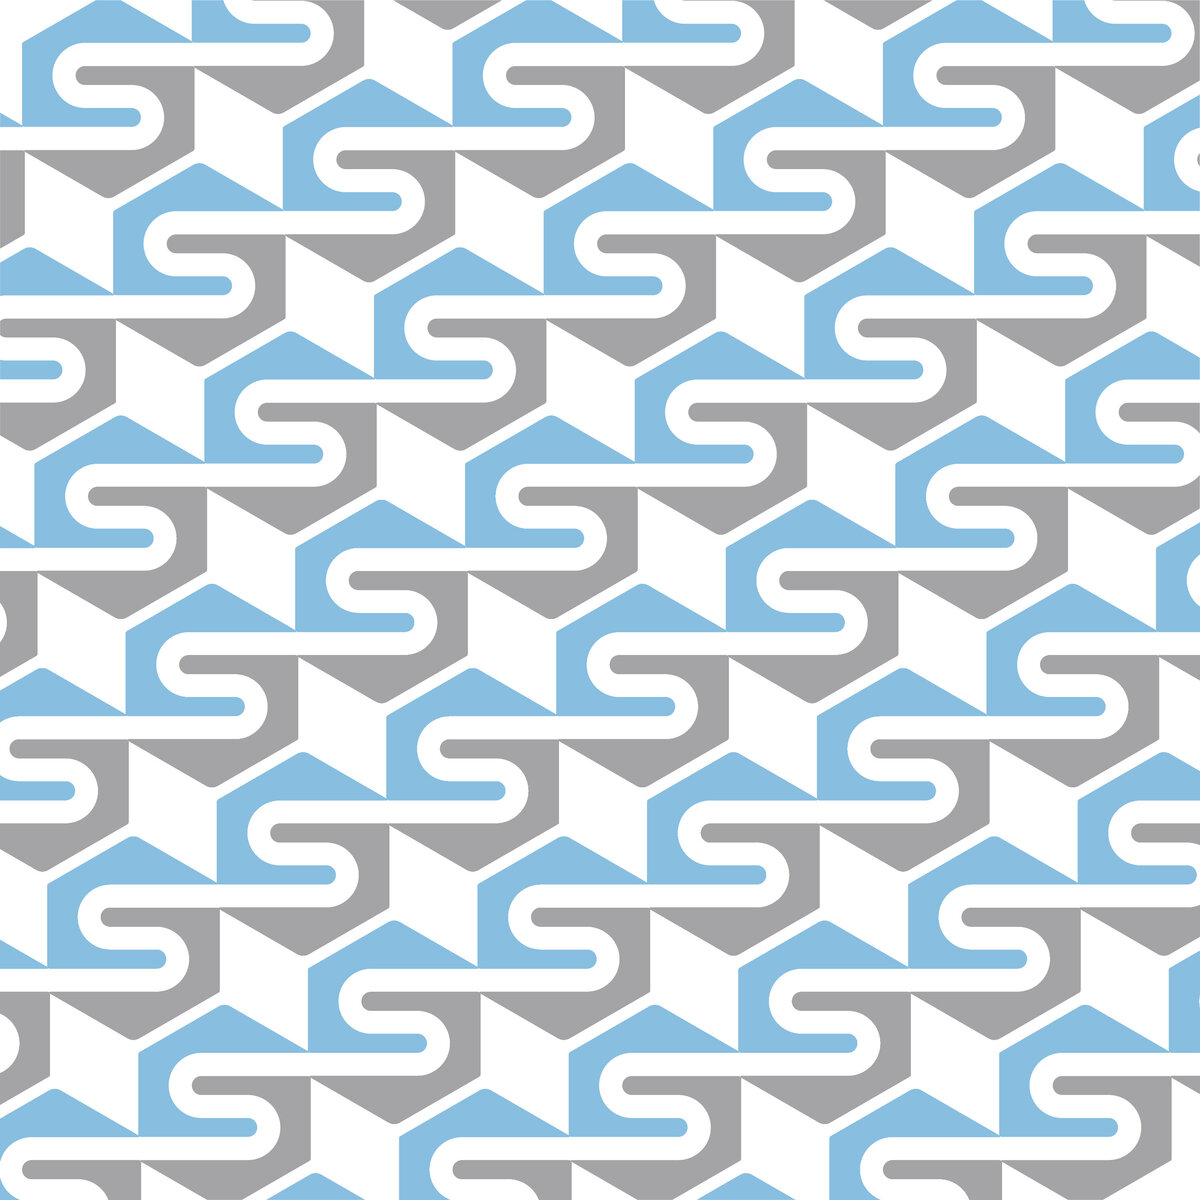 Christopher-Reed-Soundview-Commercial-Capital-Logo-Pattern